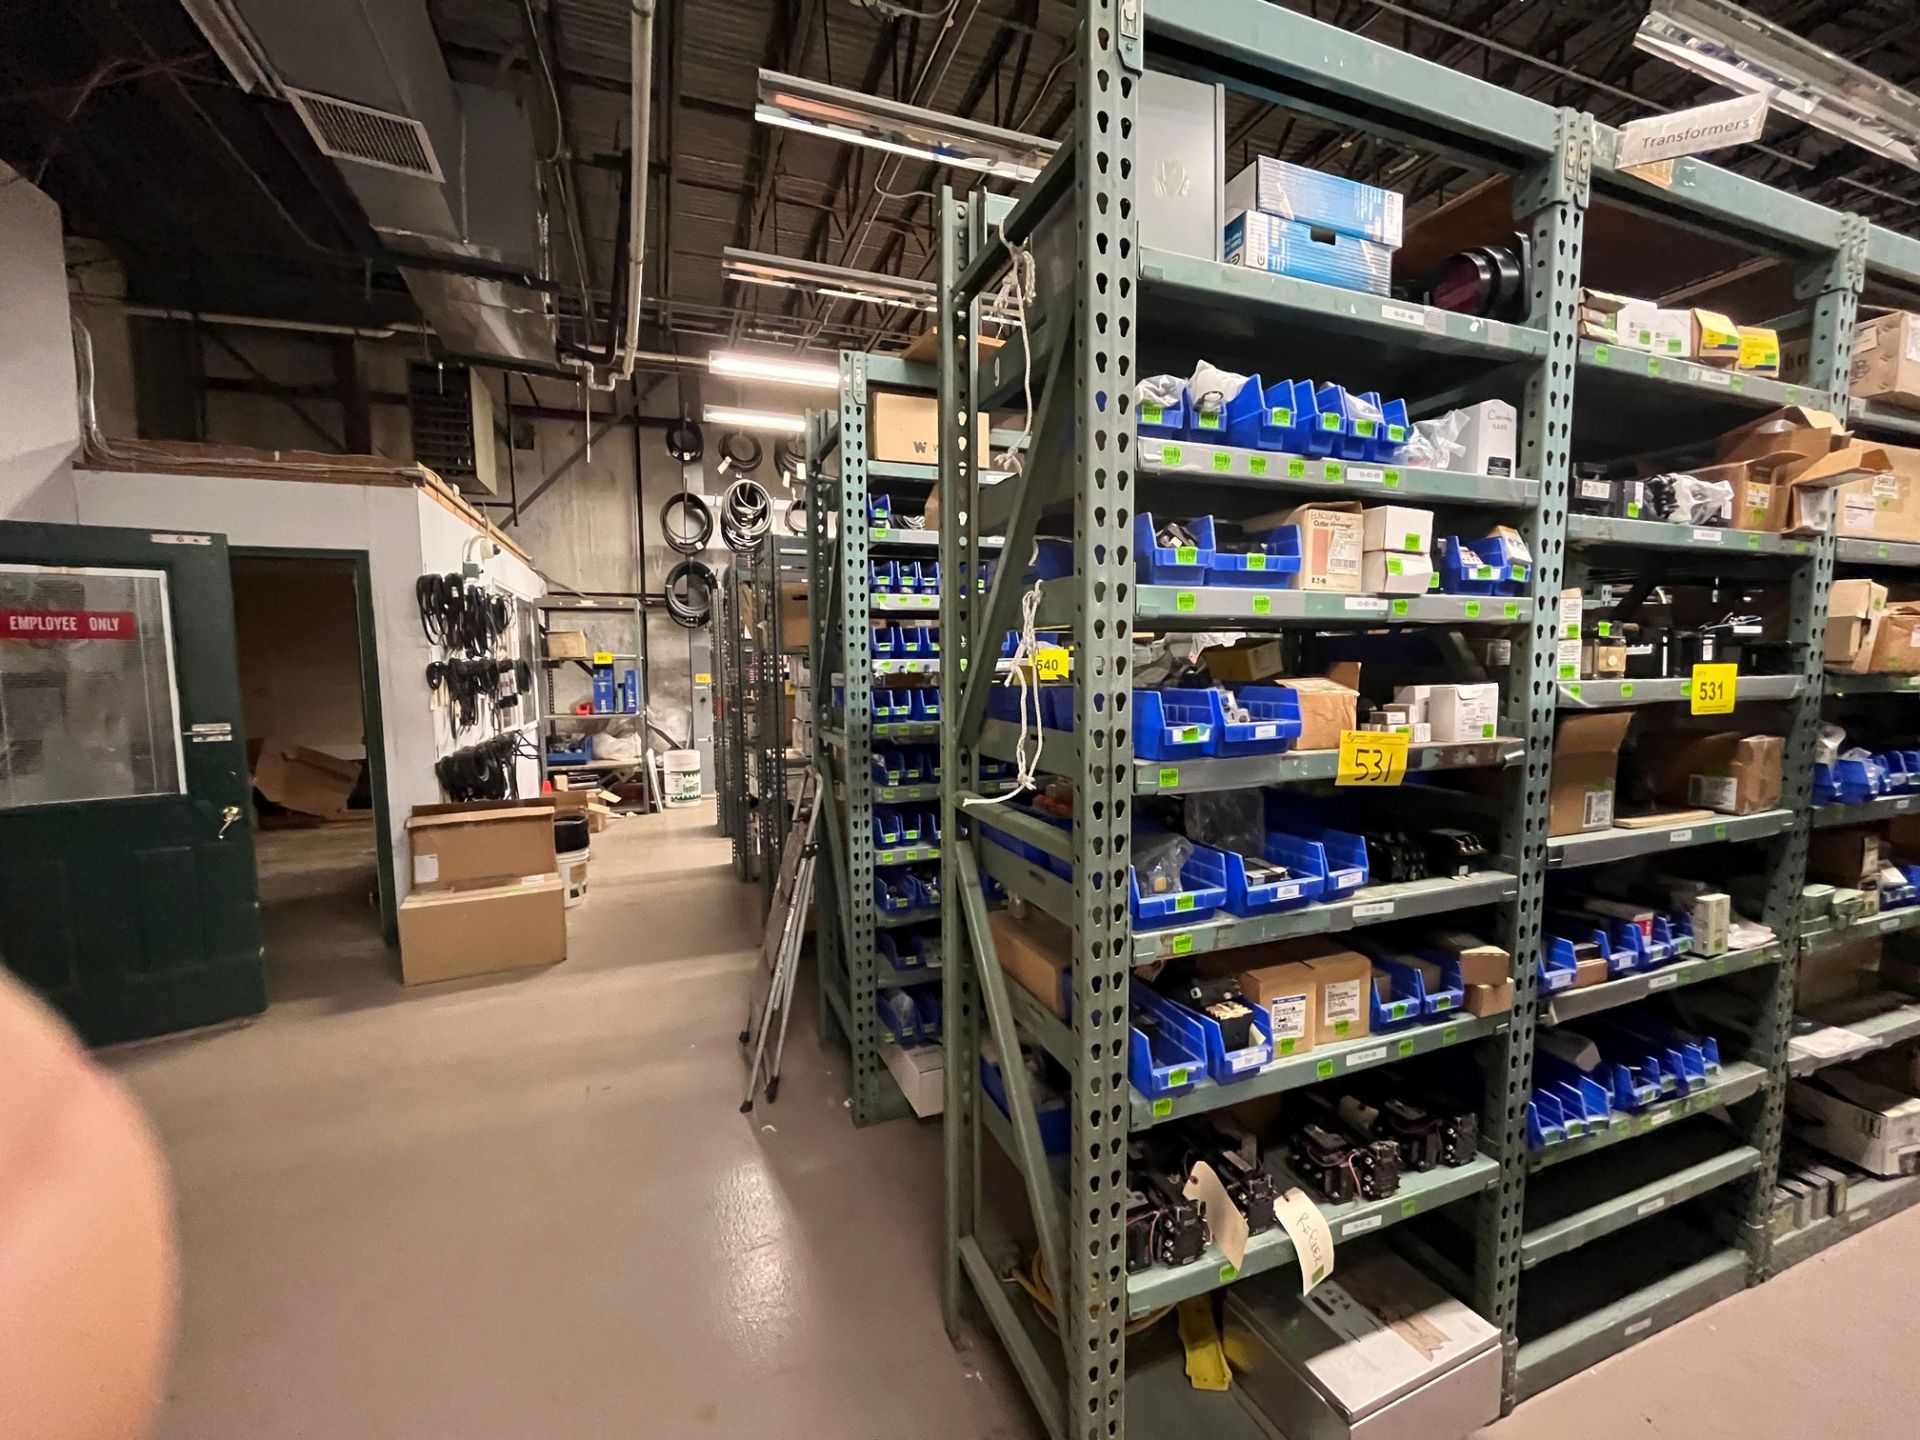 CONTENTS OF (2) SECTIONS OF 2-SIDED SHELVING INCLUDING TRANSFORMER CORE, RELAYS, METSO CONTROL